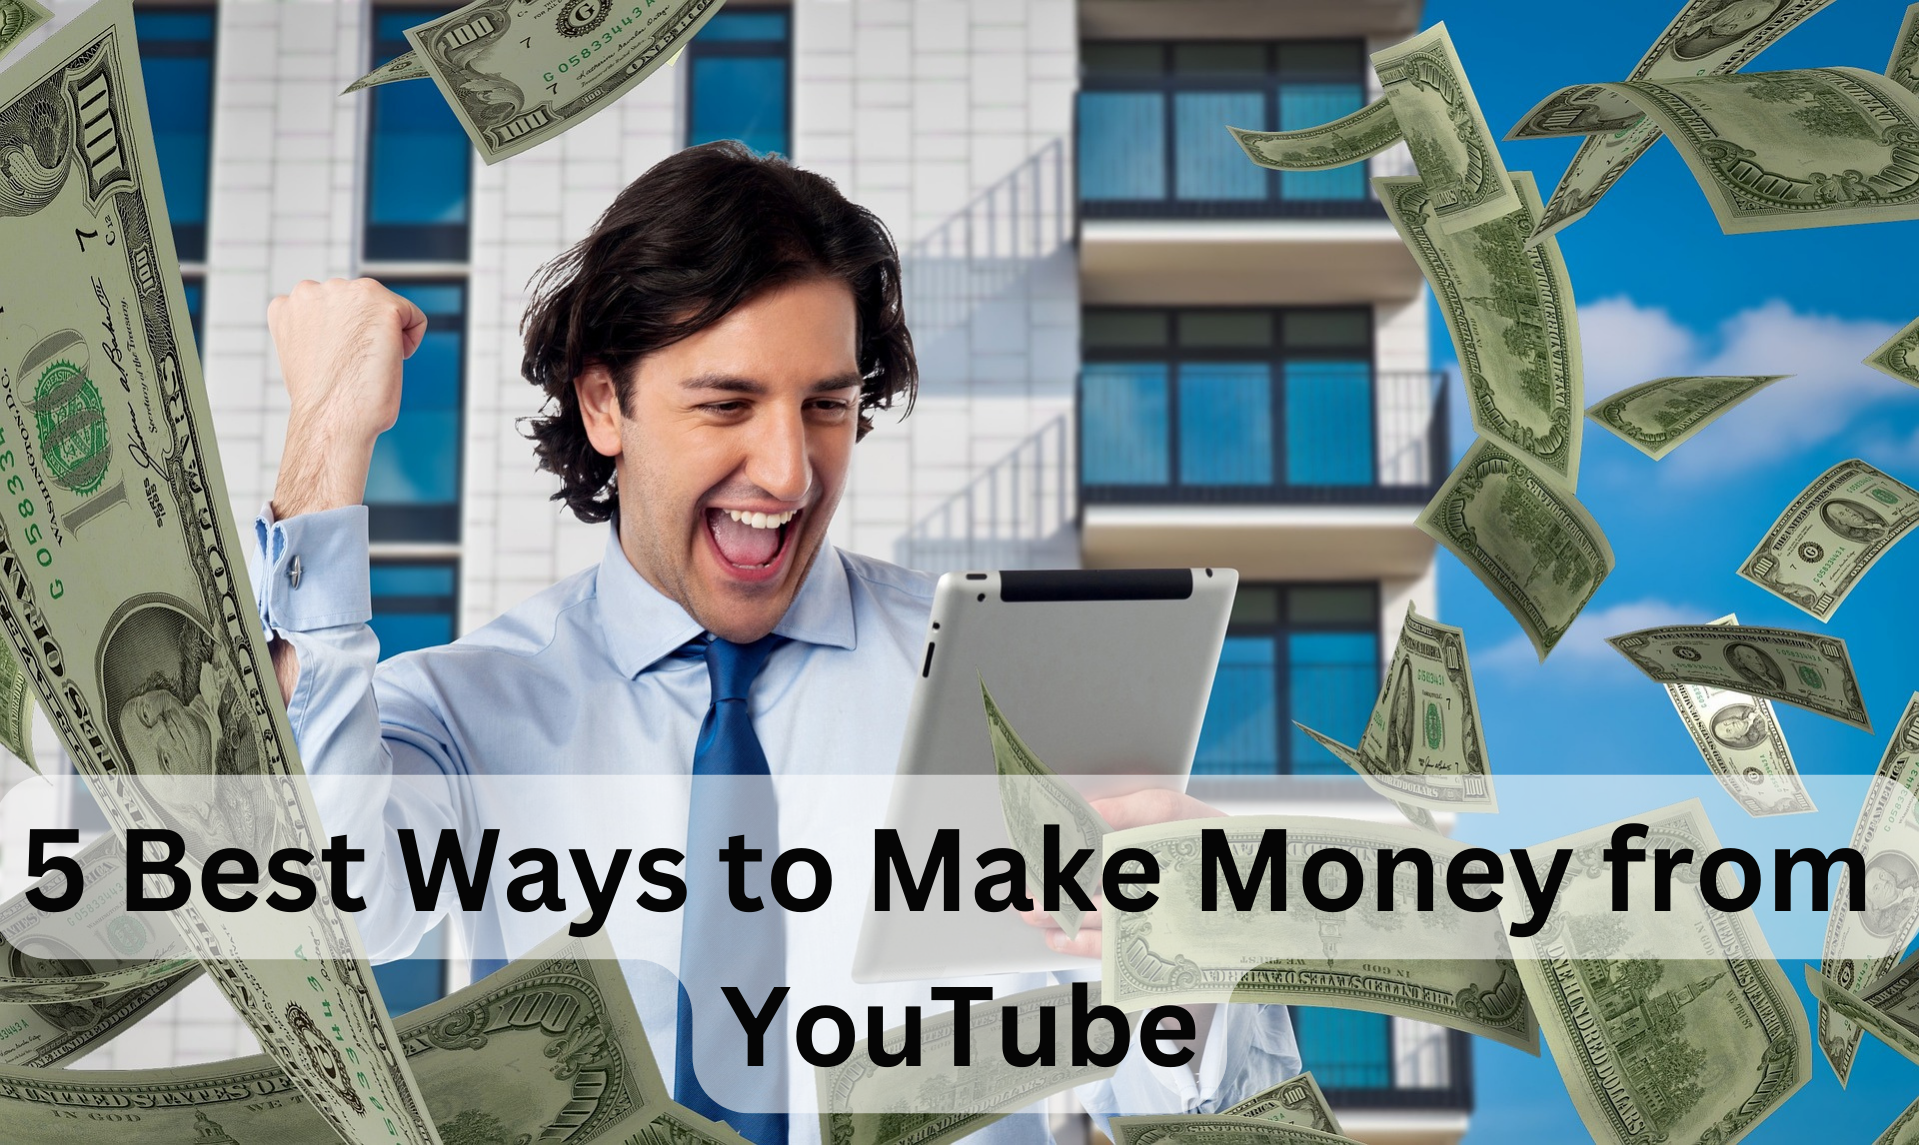 5 Best Ways to Make Money from YouTube